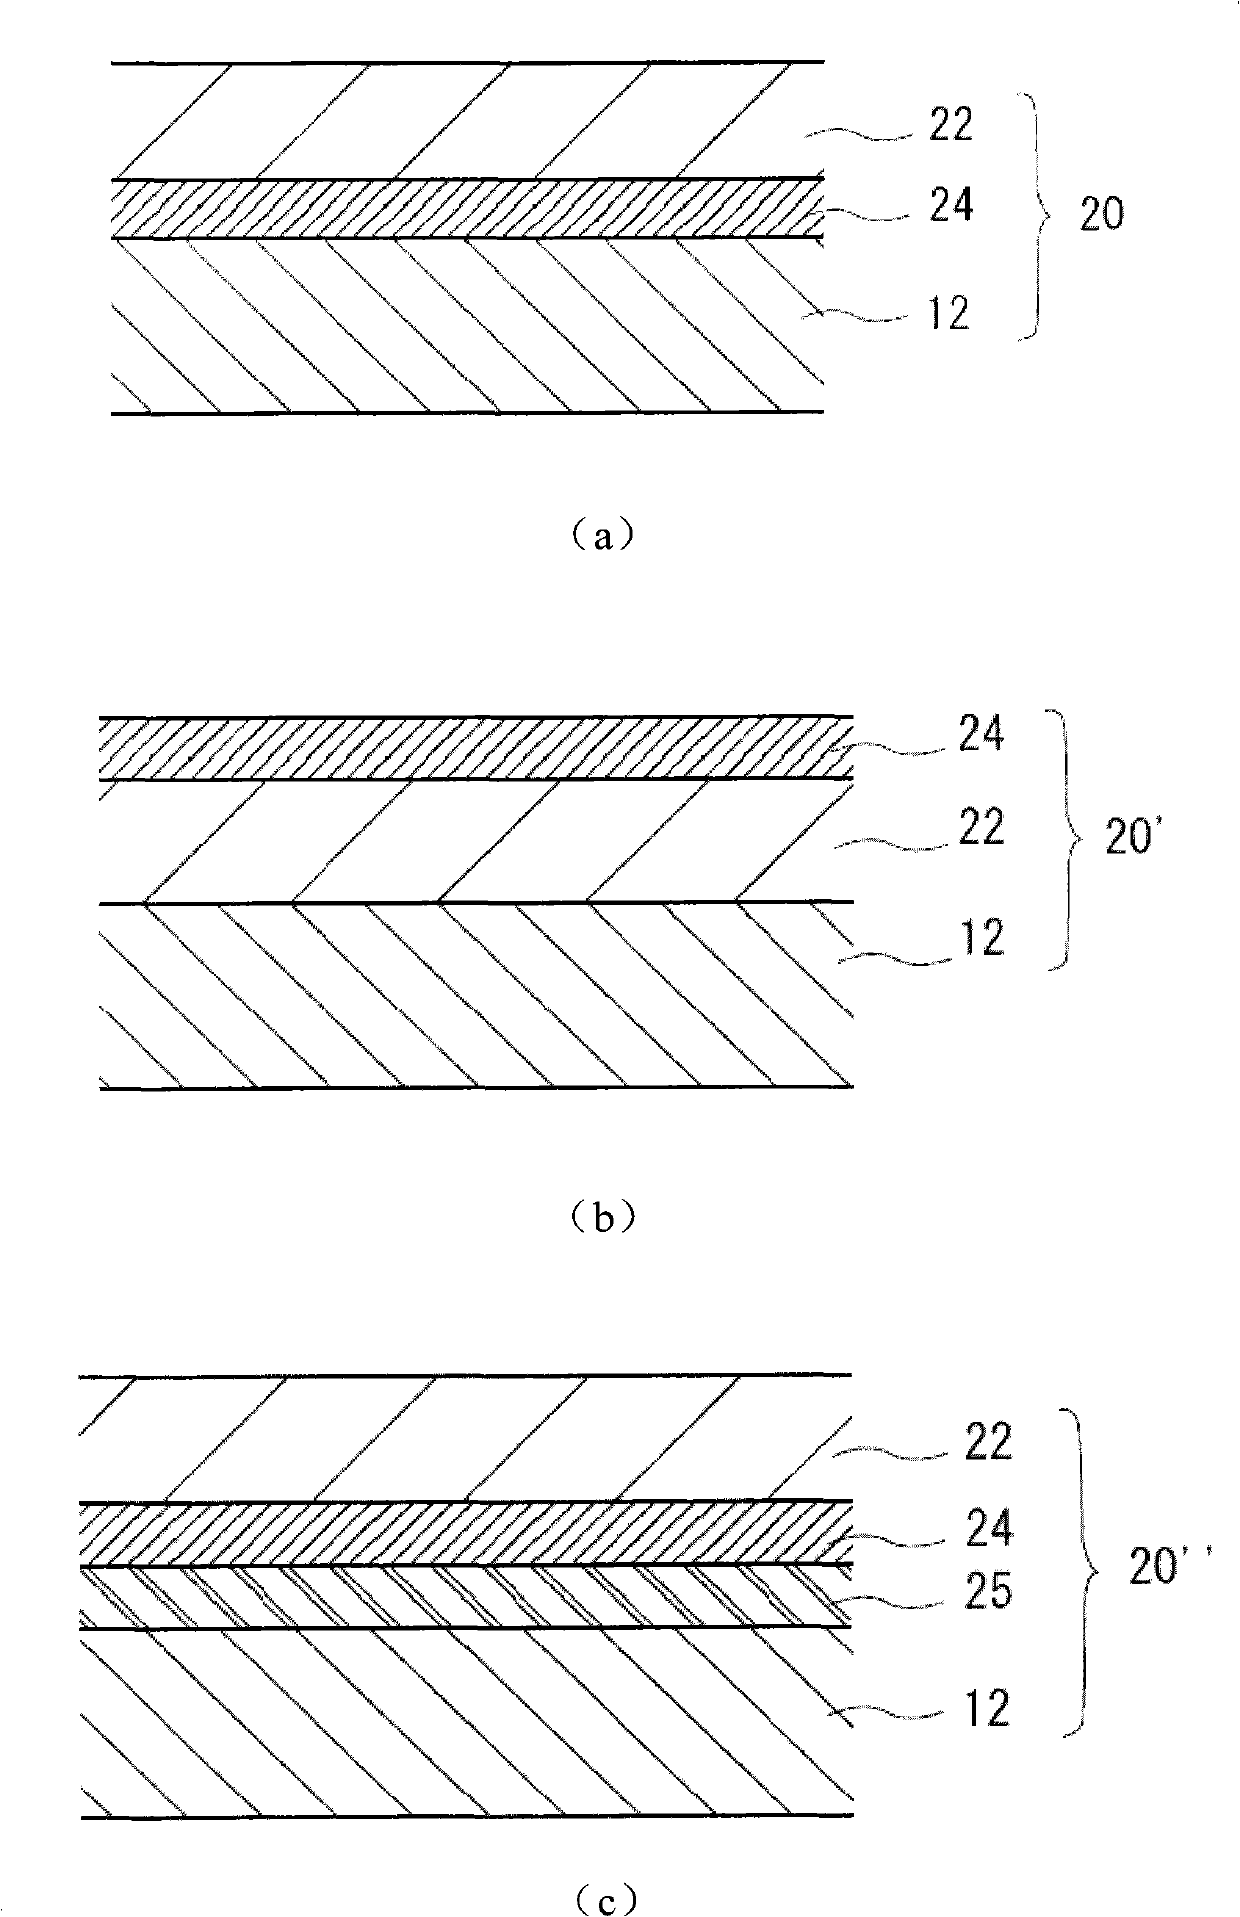 Electronic photographic photoreceptor and image forming apparatus